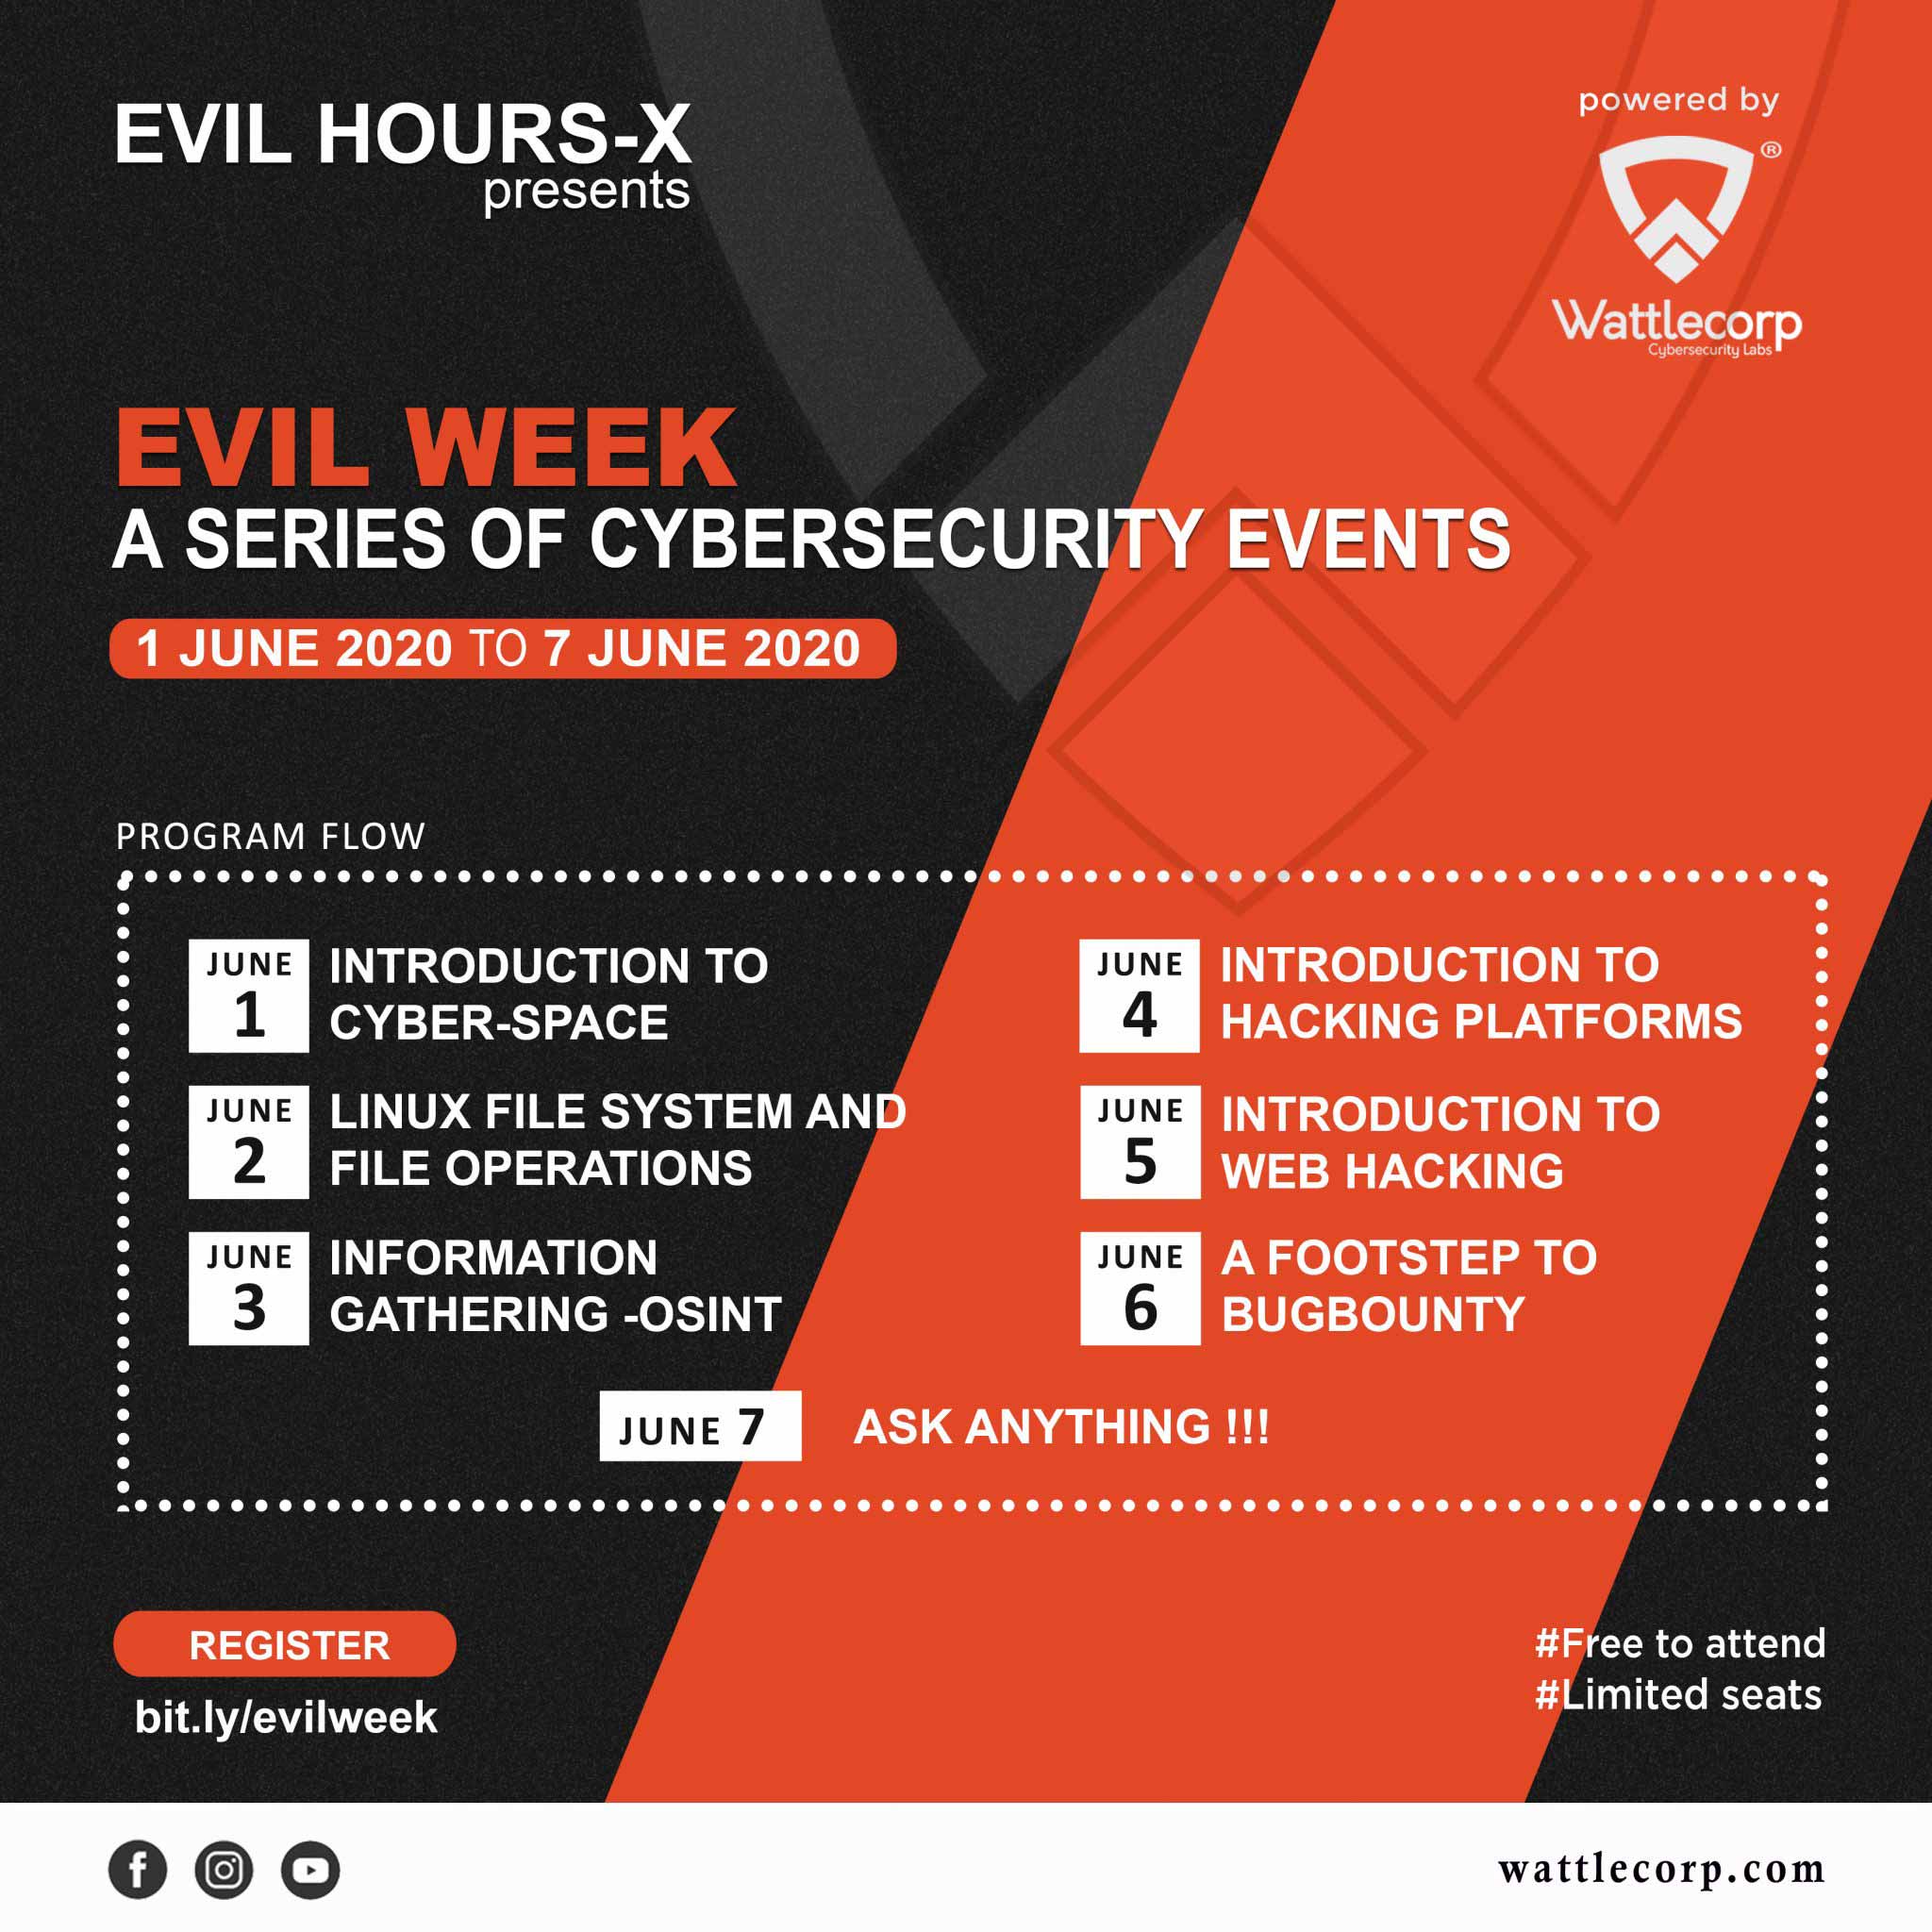 evilweek-wattlecorp-community-event-cybersecurity-ethical-hacking